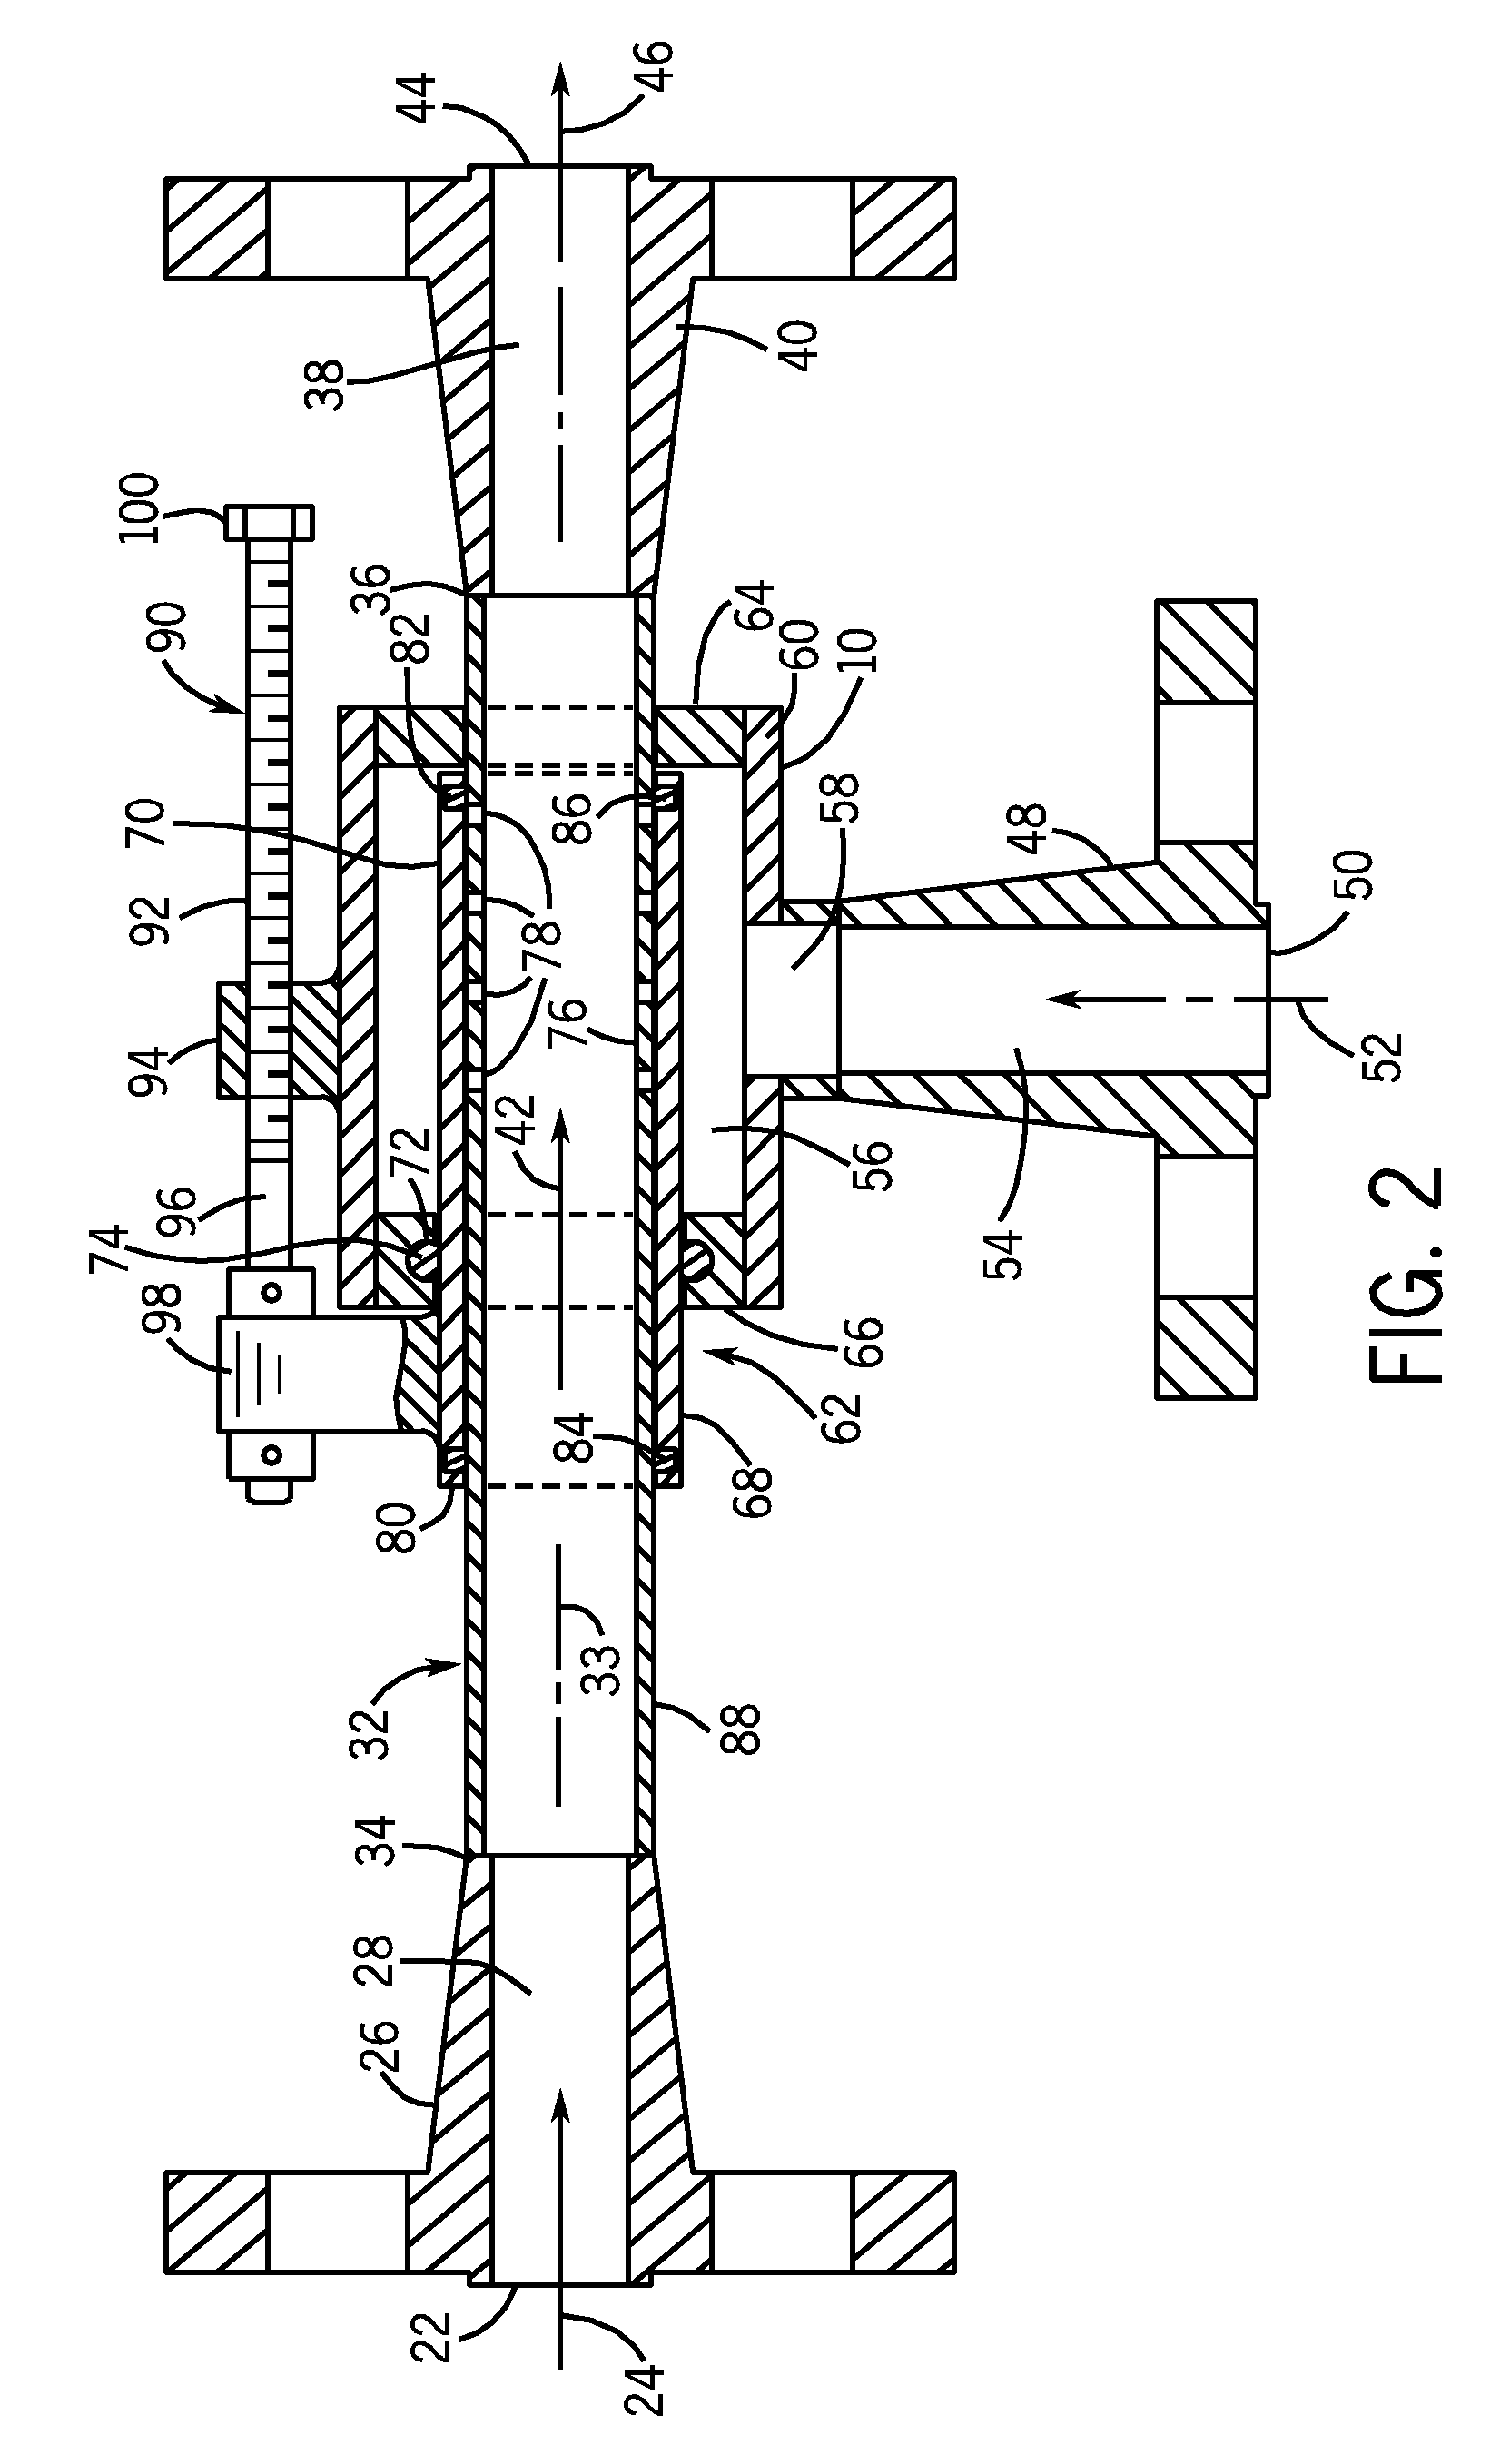 Radial flow steam injection heater